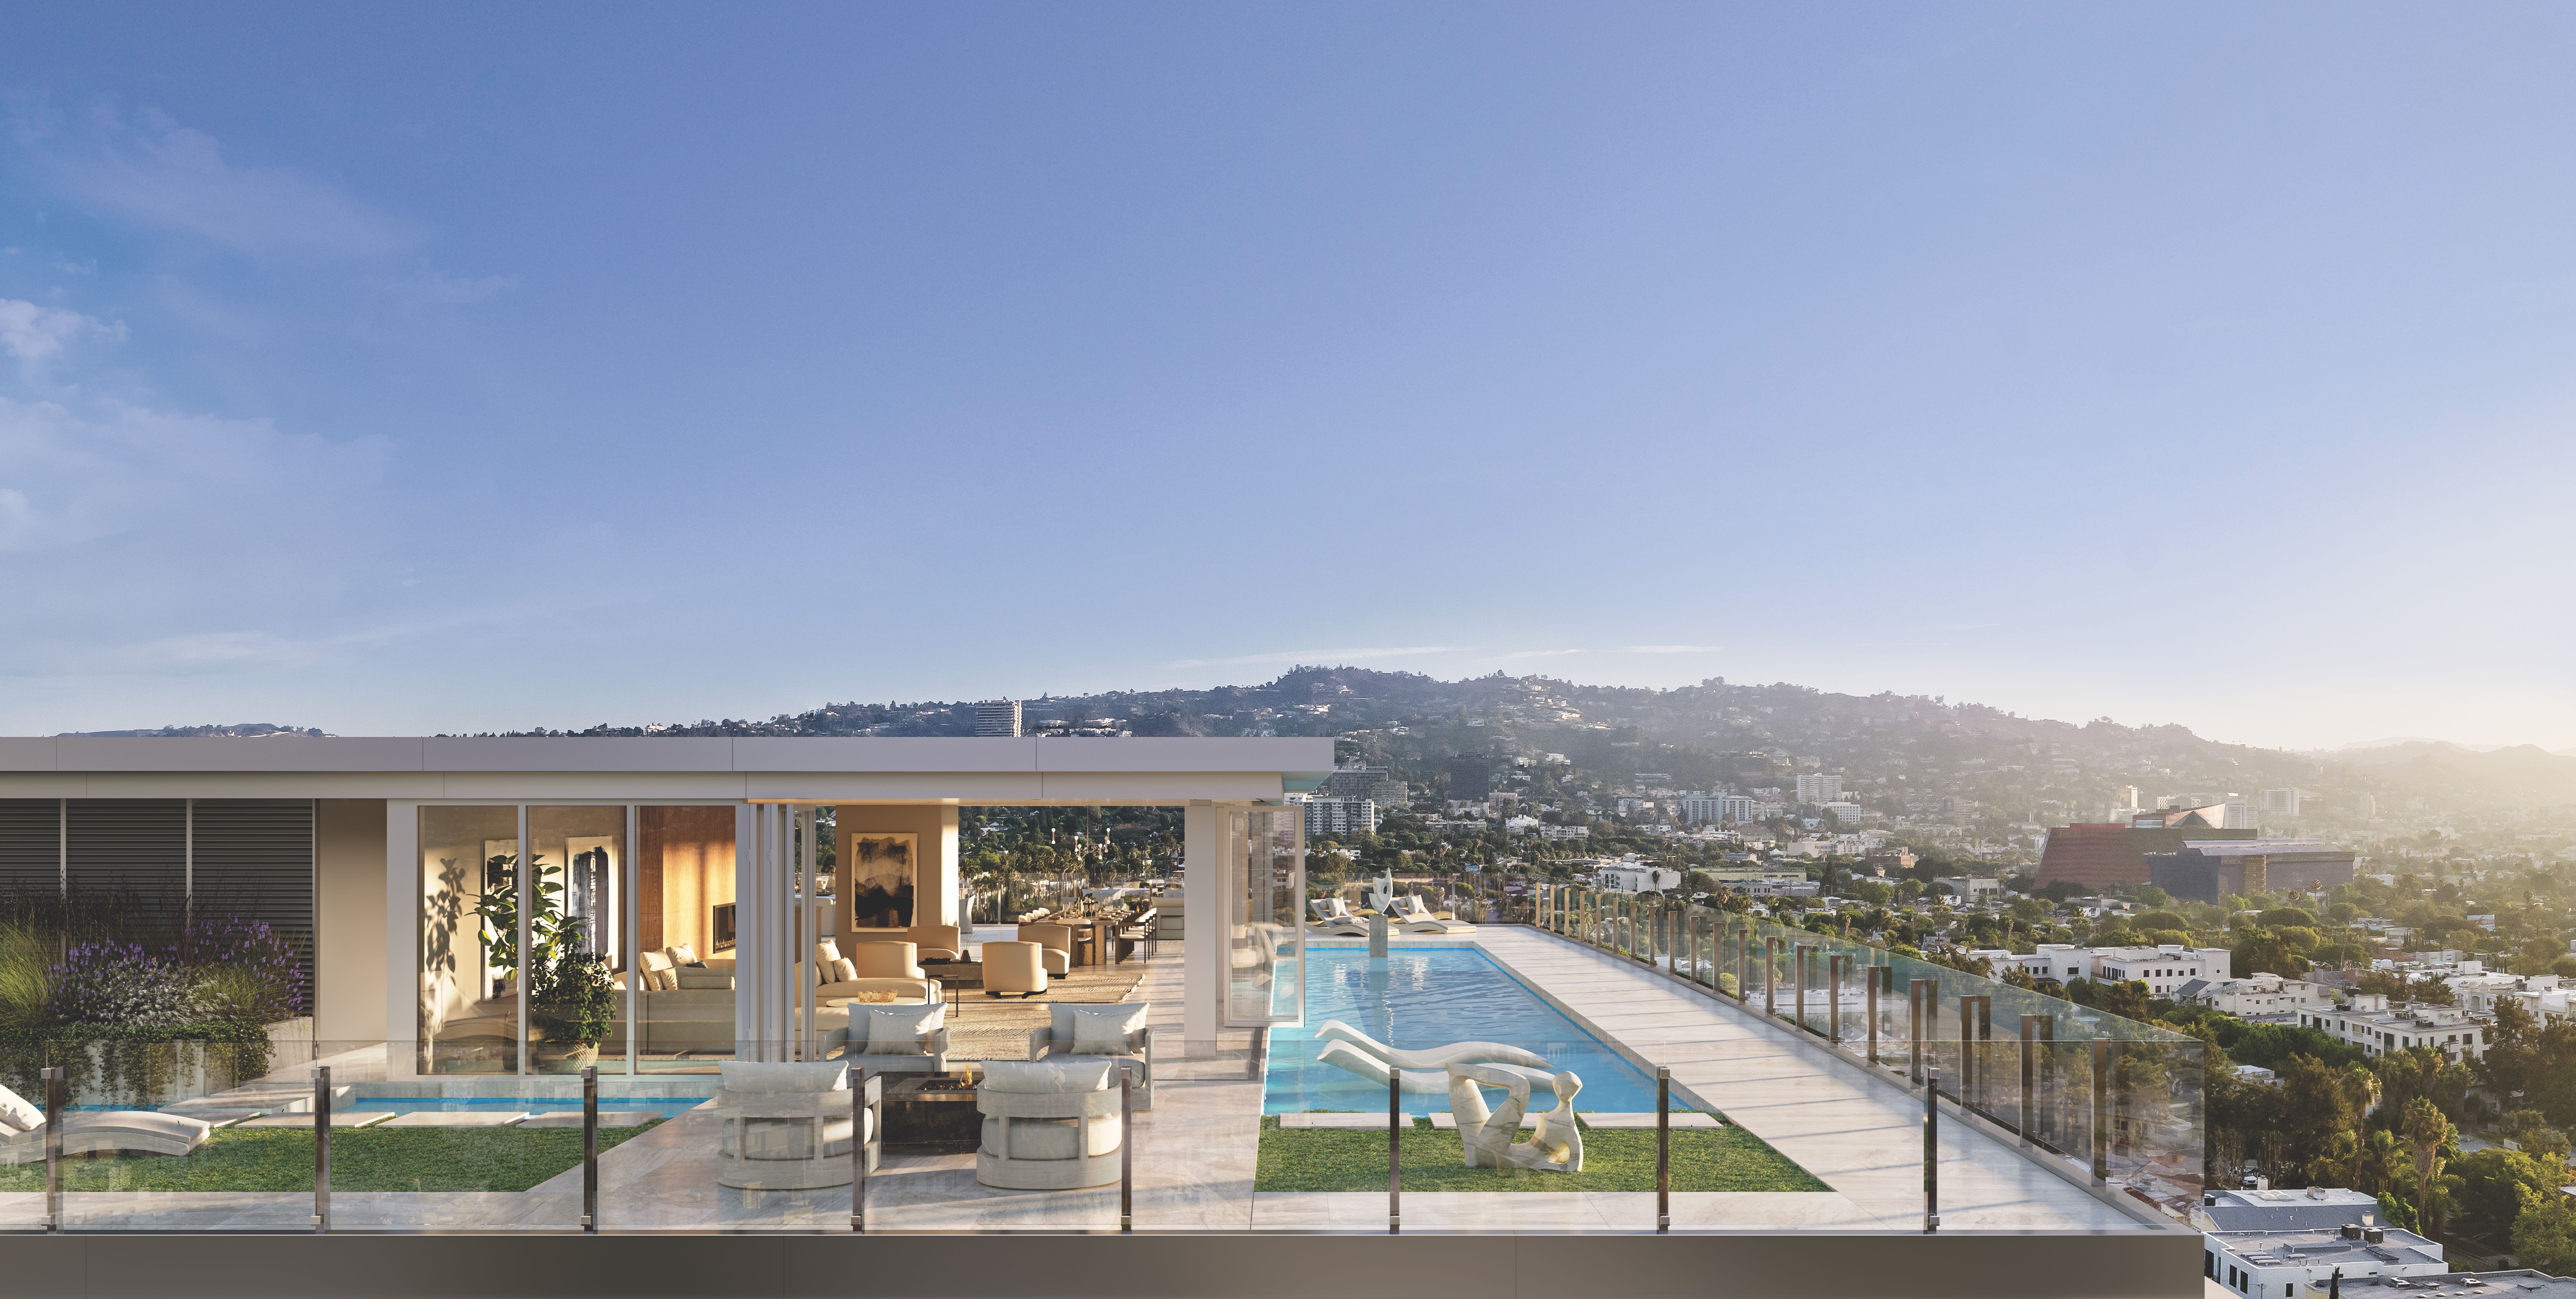 Luxury Developers in Los Angeles Bet Someone Will Pay Record Prices for These Condos